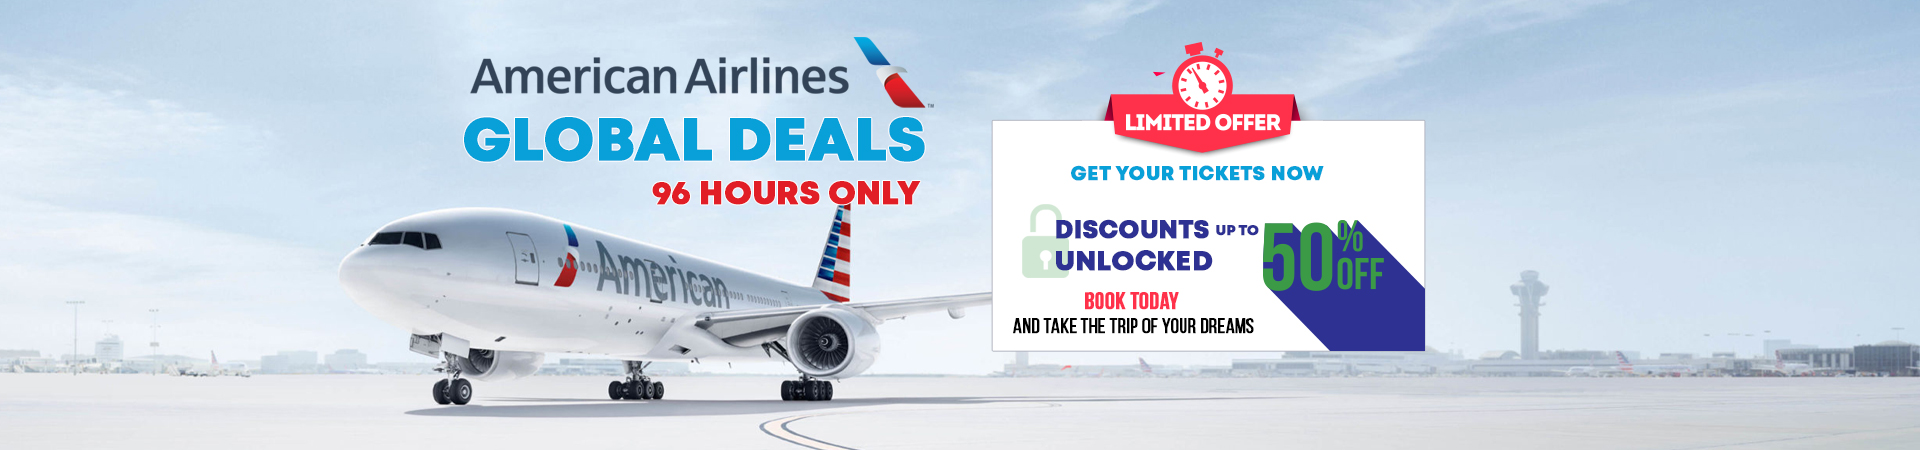 American Airlines Global Deals